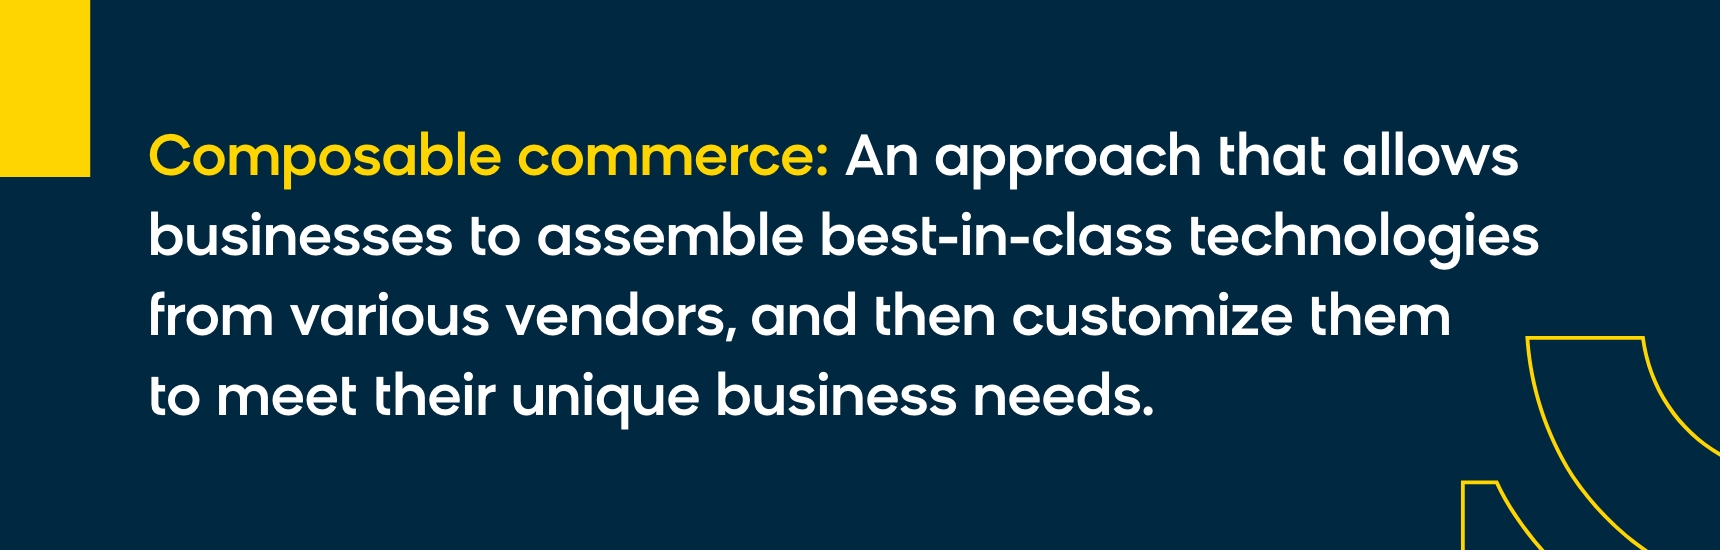 Definition of composable commerce